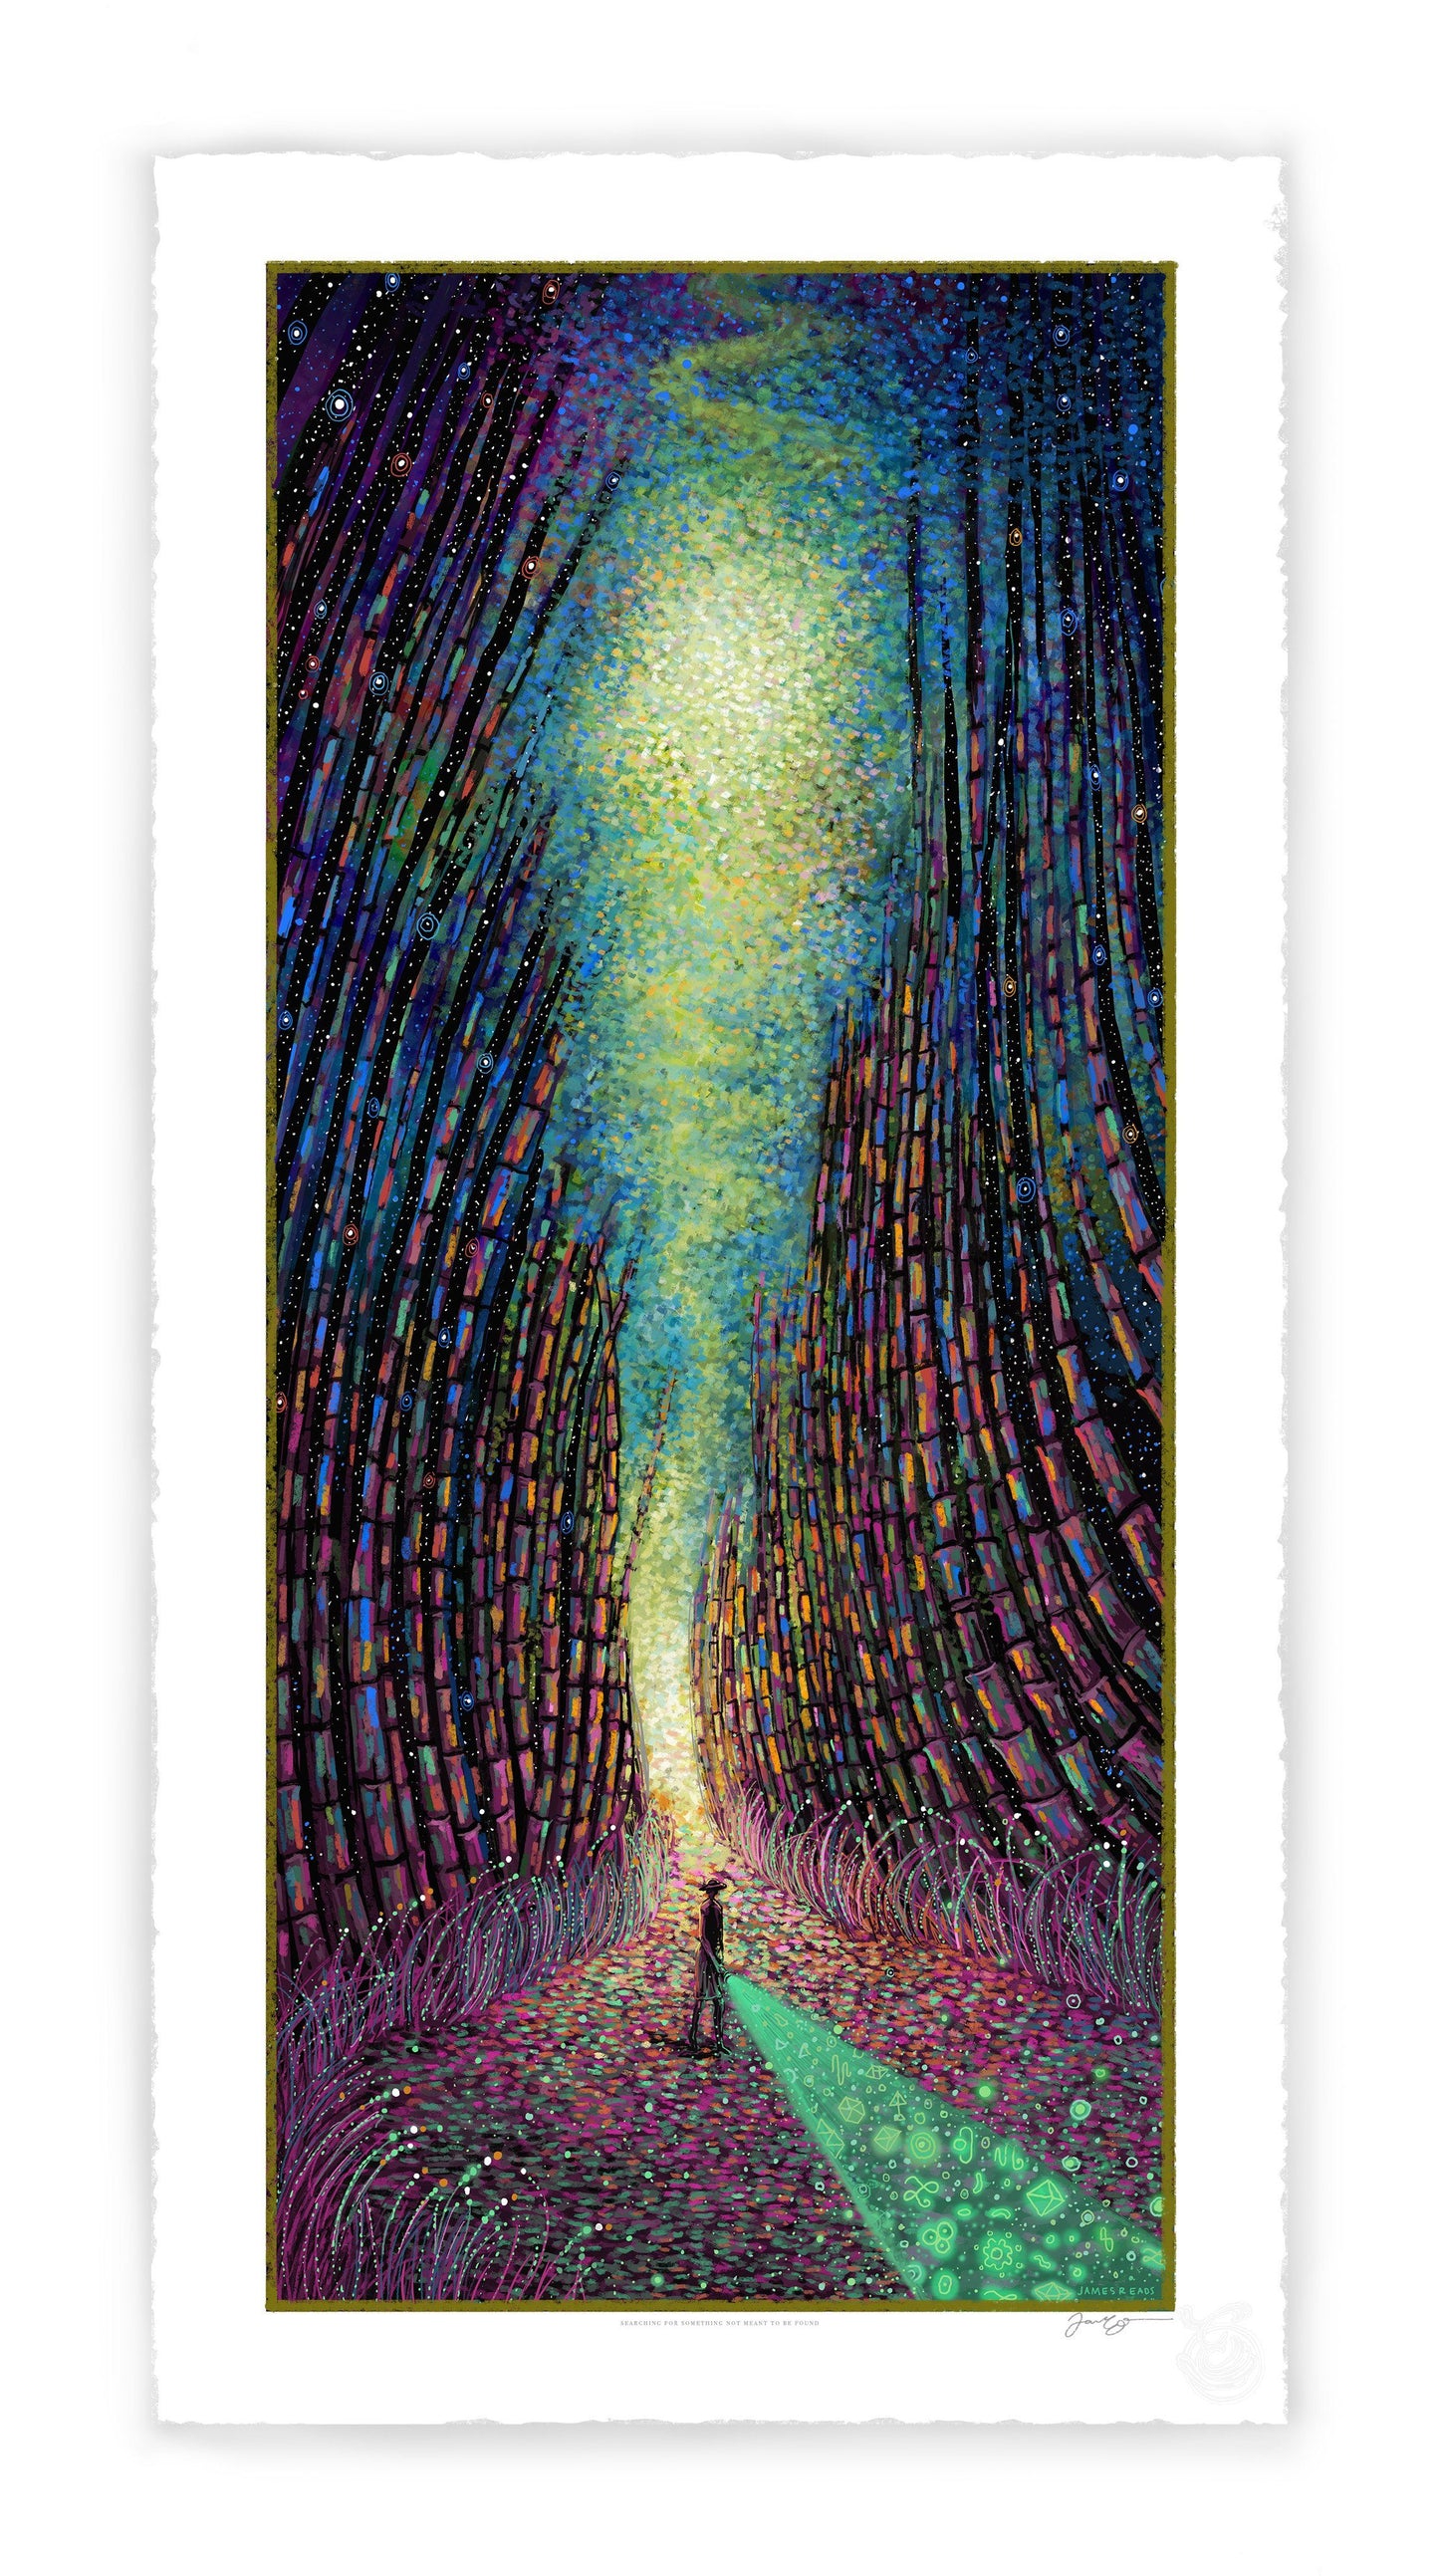 Searching For Something Not Meant to Be Found (Limited Edition of 123) Print James R. Eads